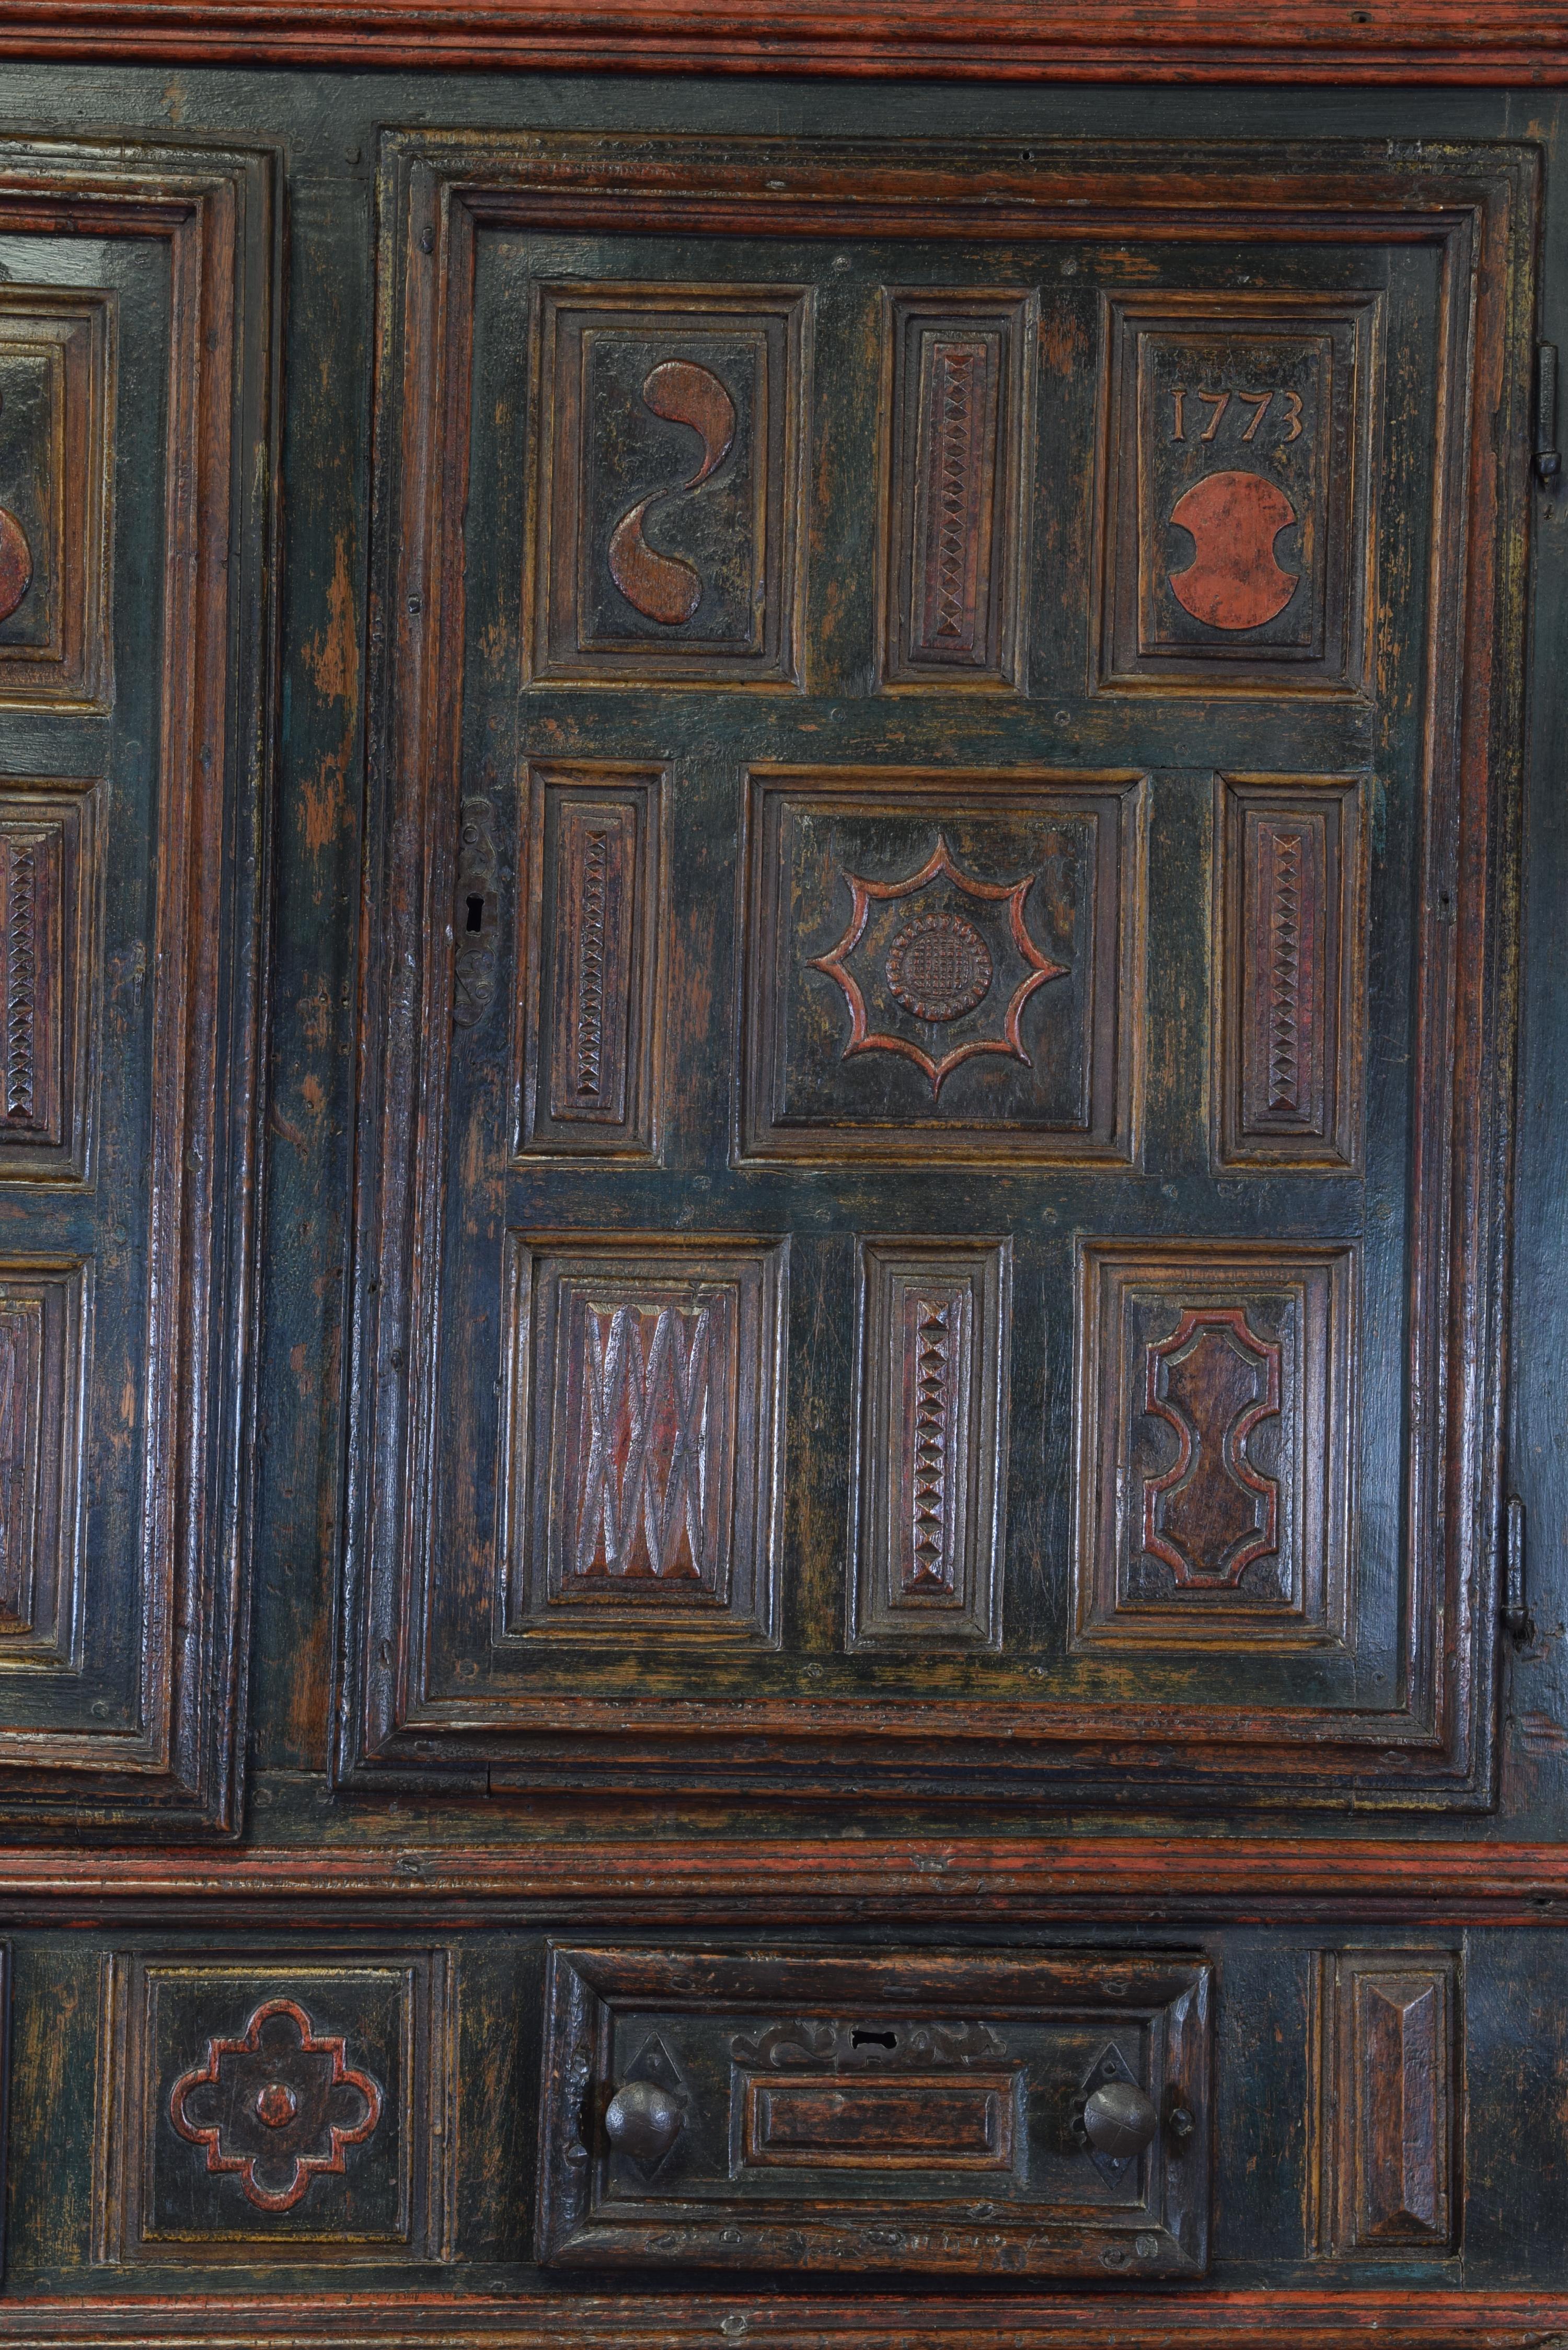 Late 18th Century Polychromed Wood and Iron Cupboard. Spain, 1773. Dated